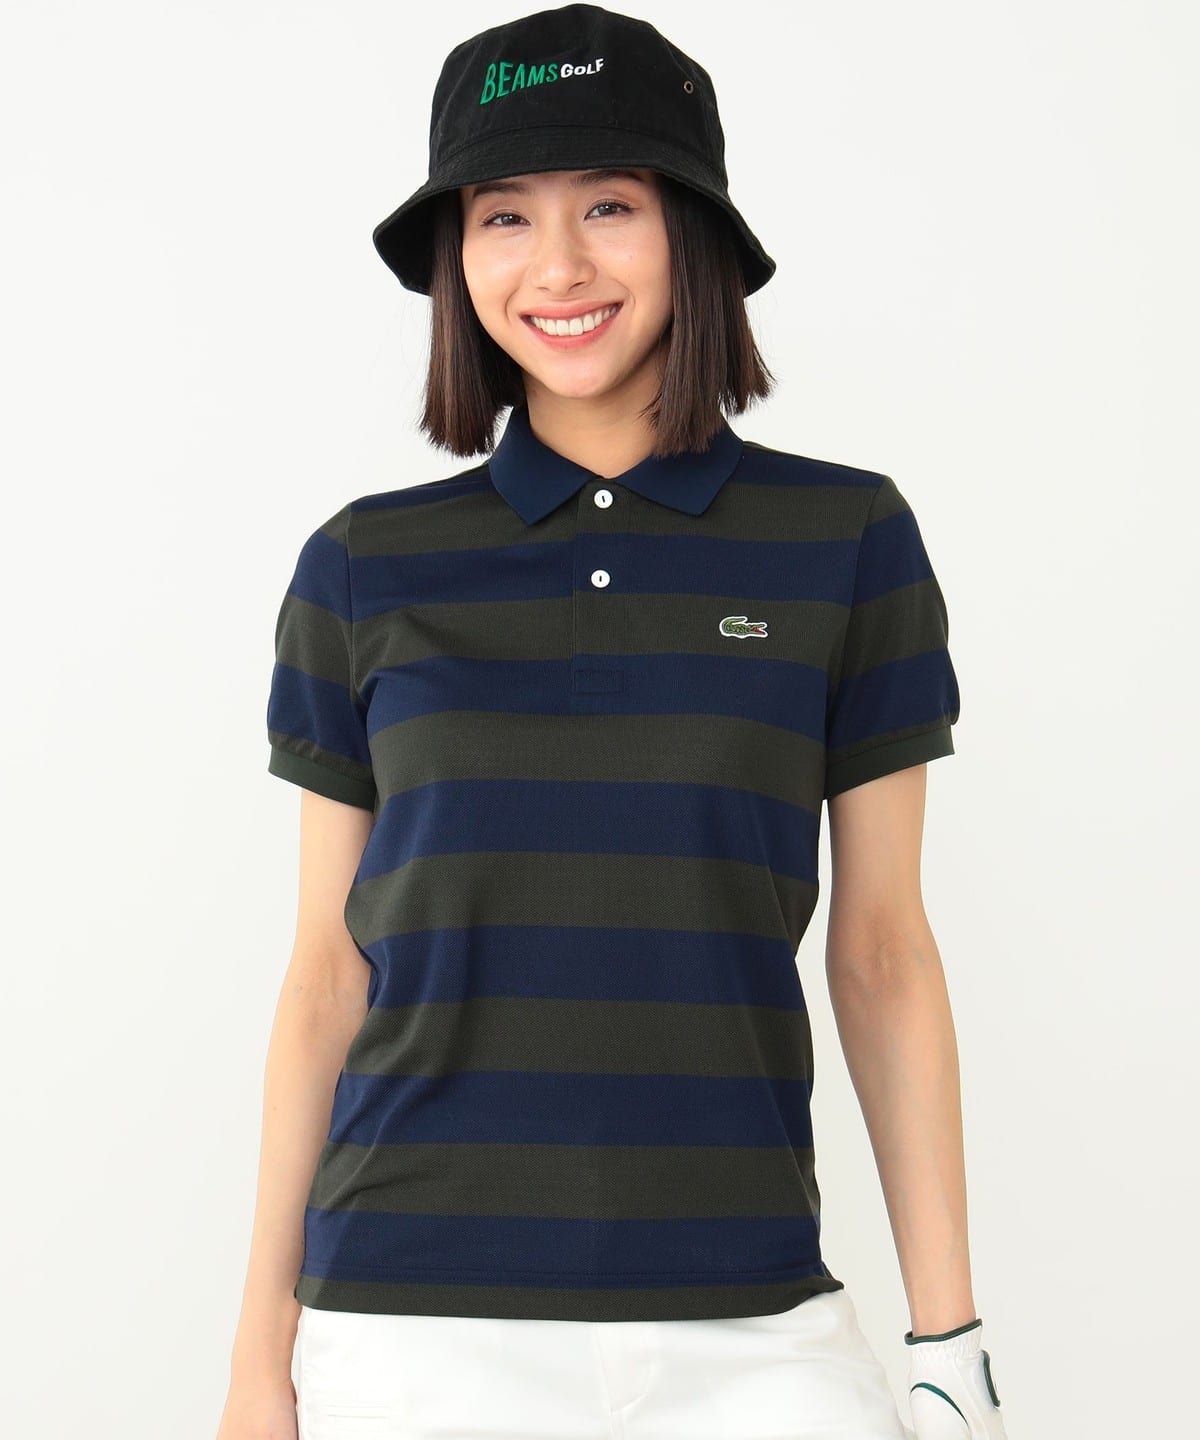 〈WOMEN〉Lacoste for BEAMS GOLF / 別注 ボーダー ポロシャツ